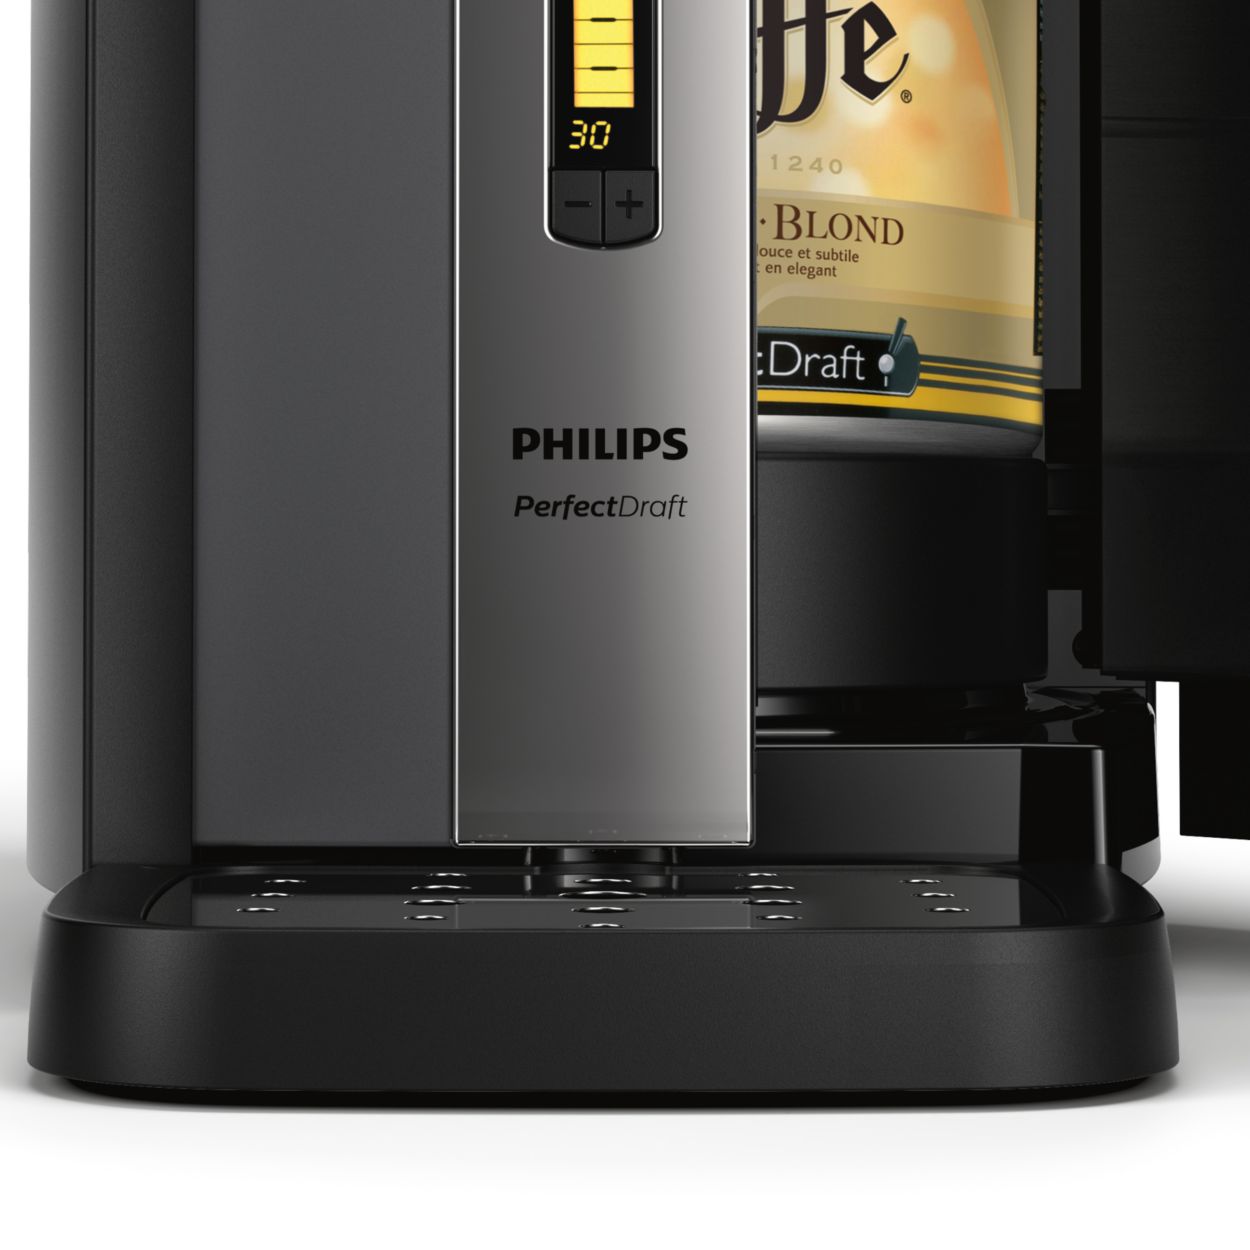 Pompe tireuse a biere perfectdraft philips hd3620 - NPM Lille